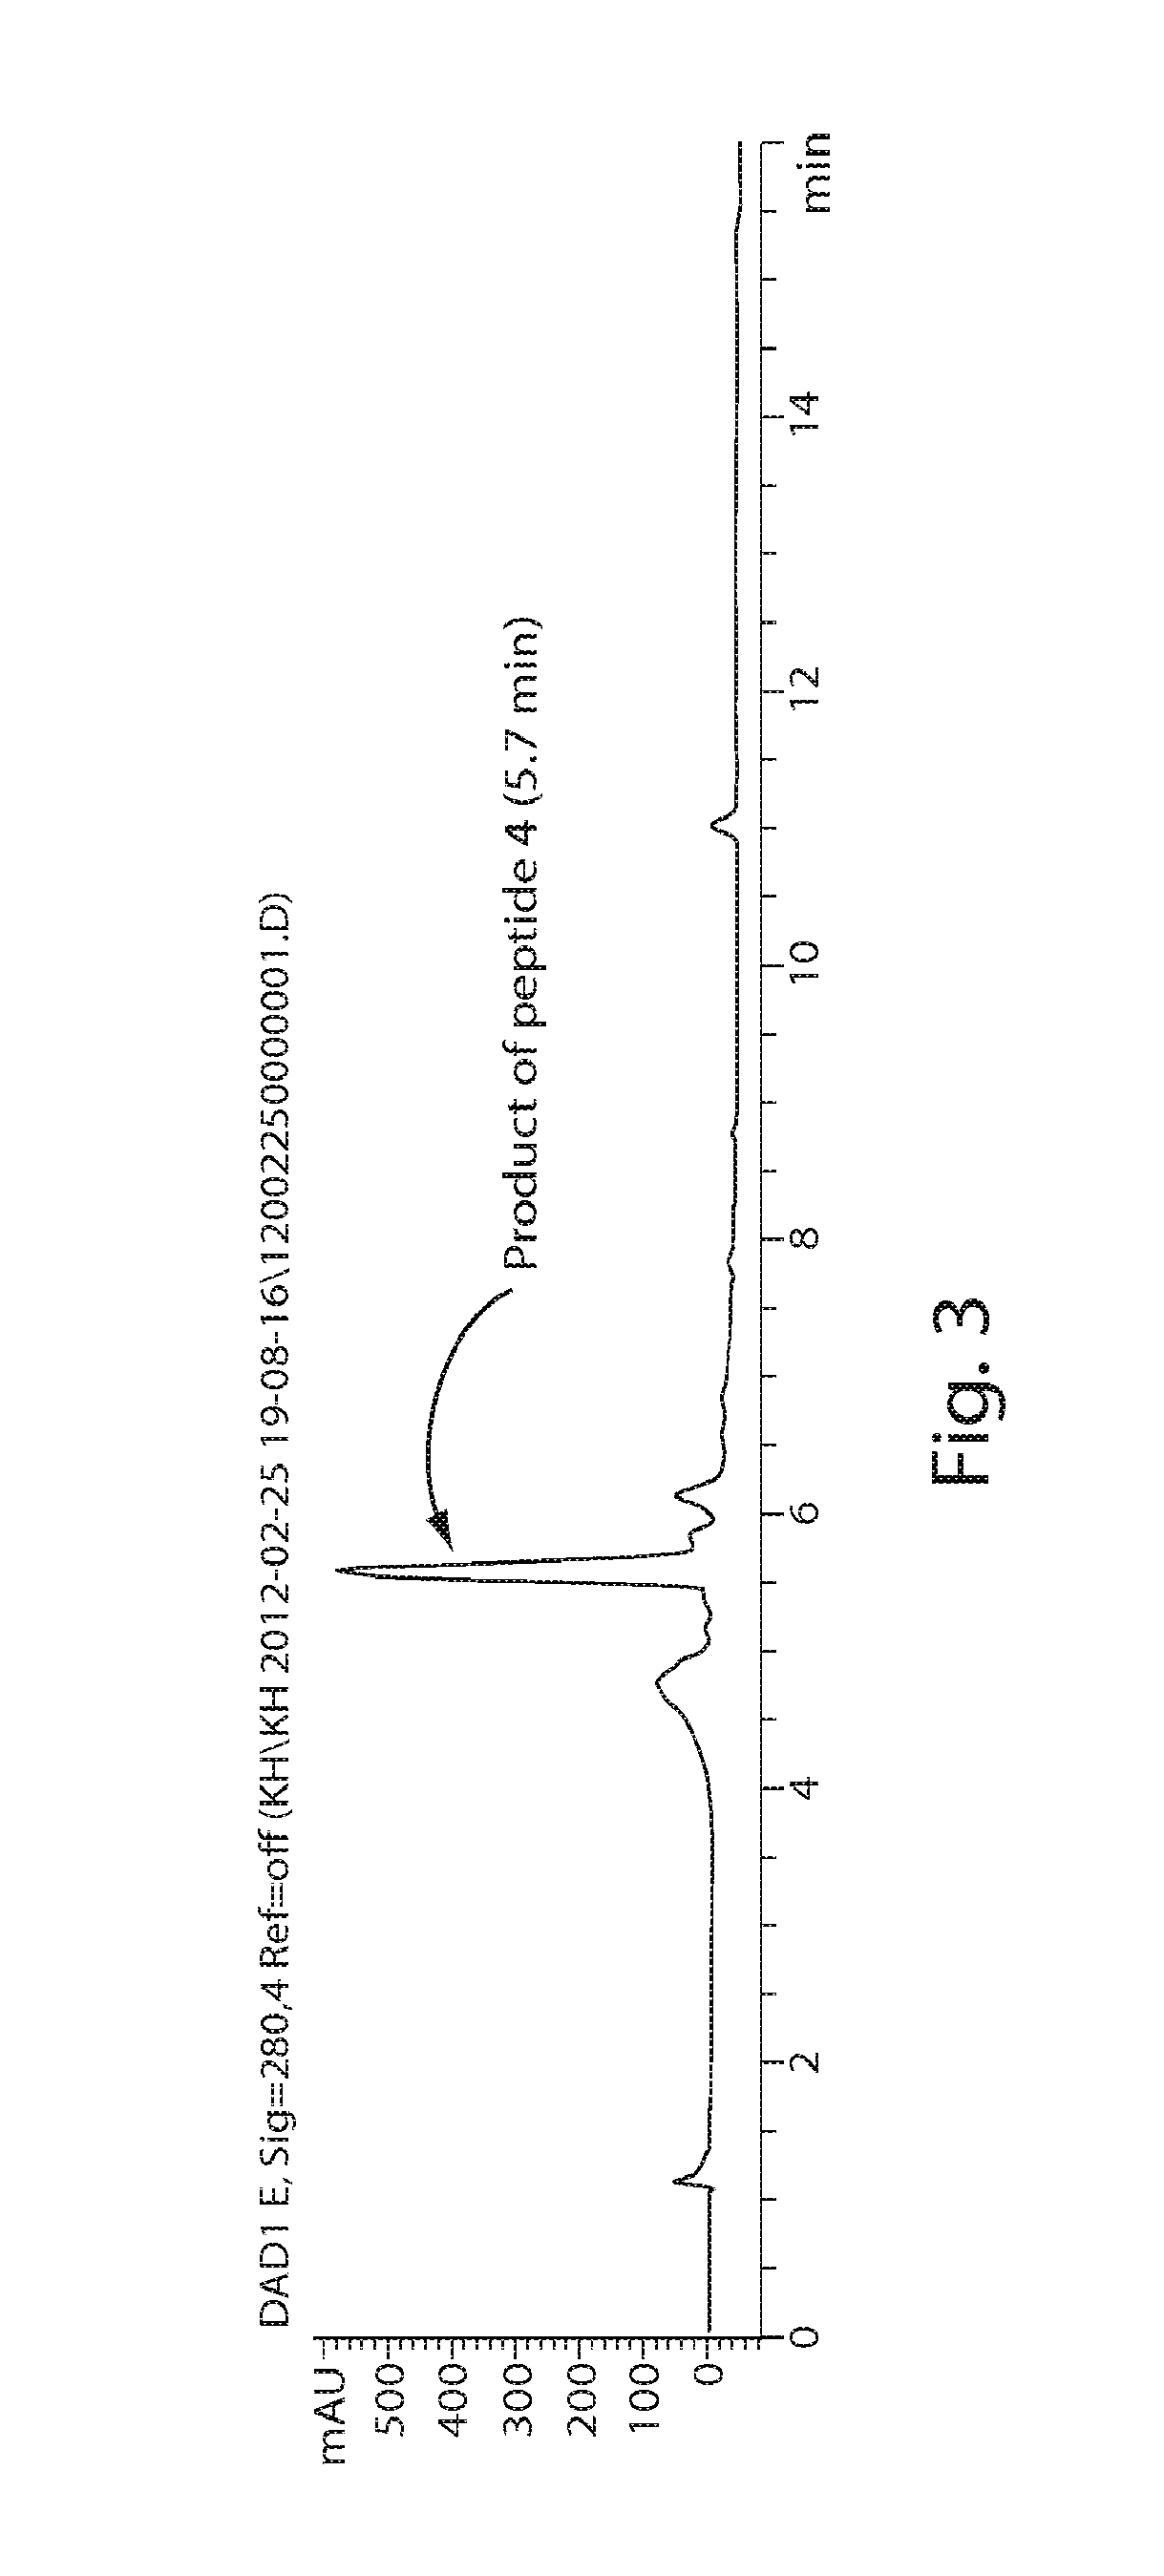 Proline-locked stapled peptides and uses thereof